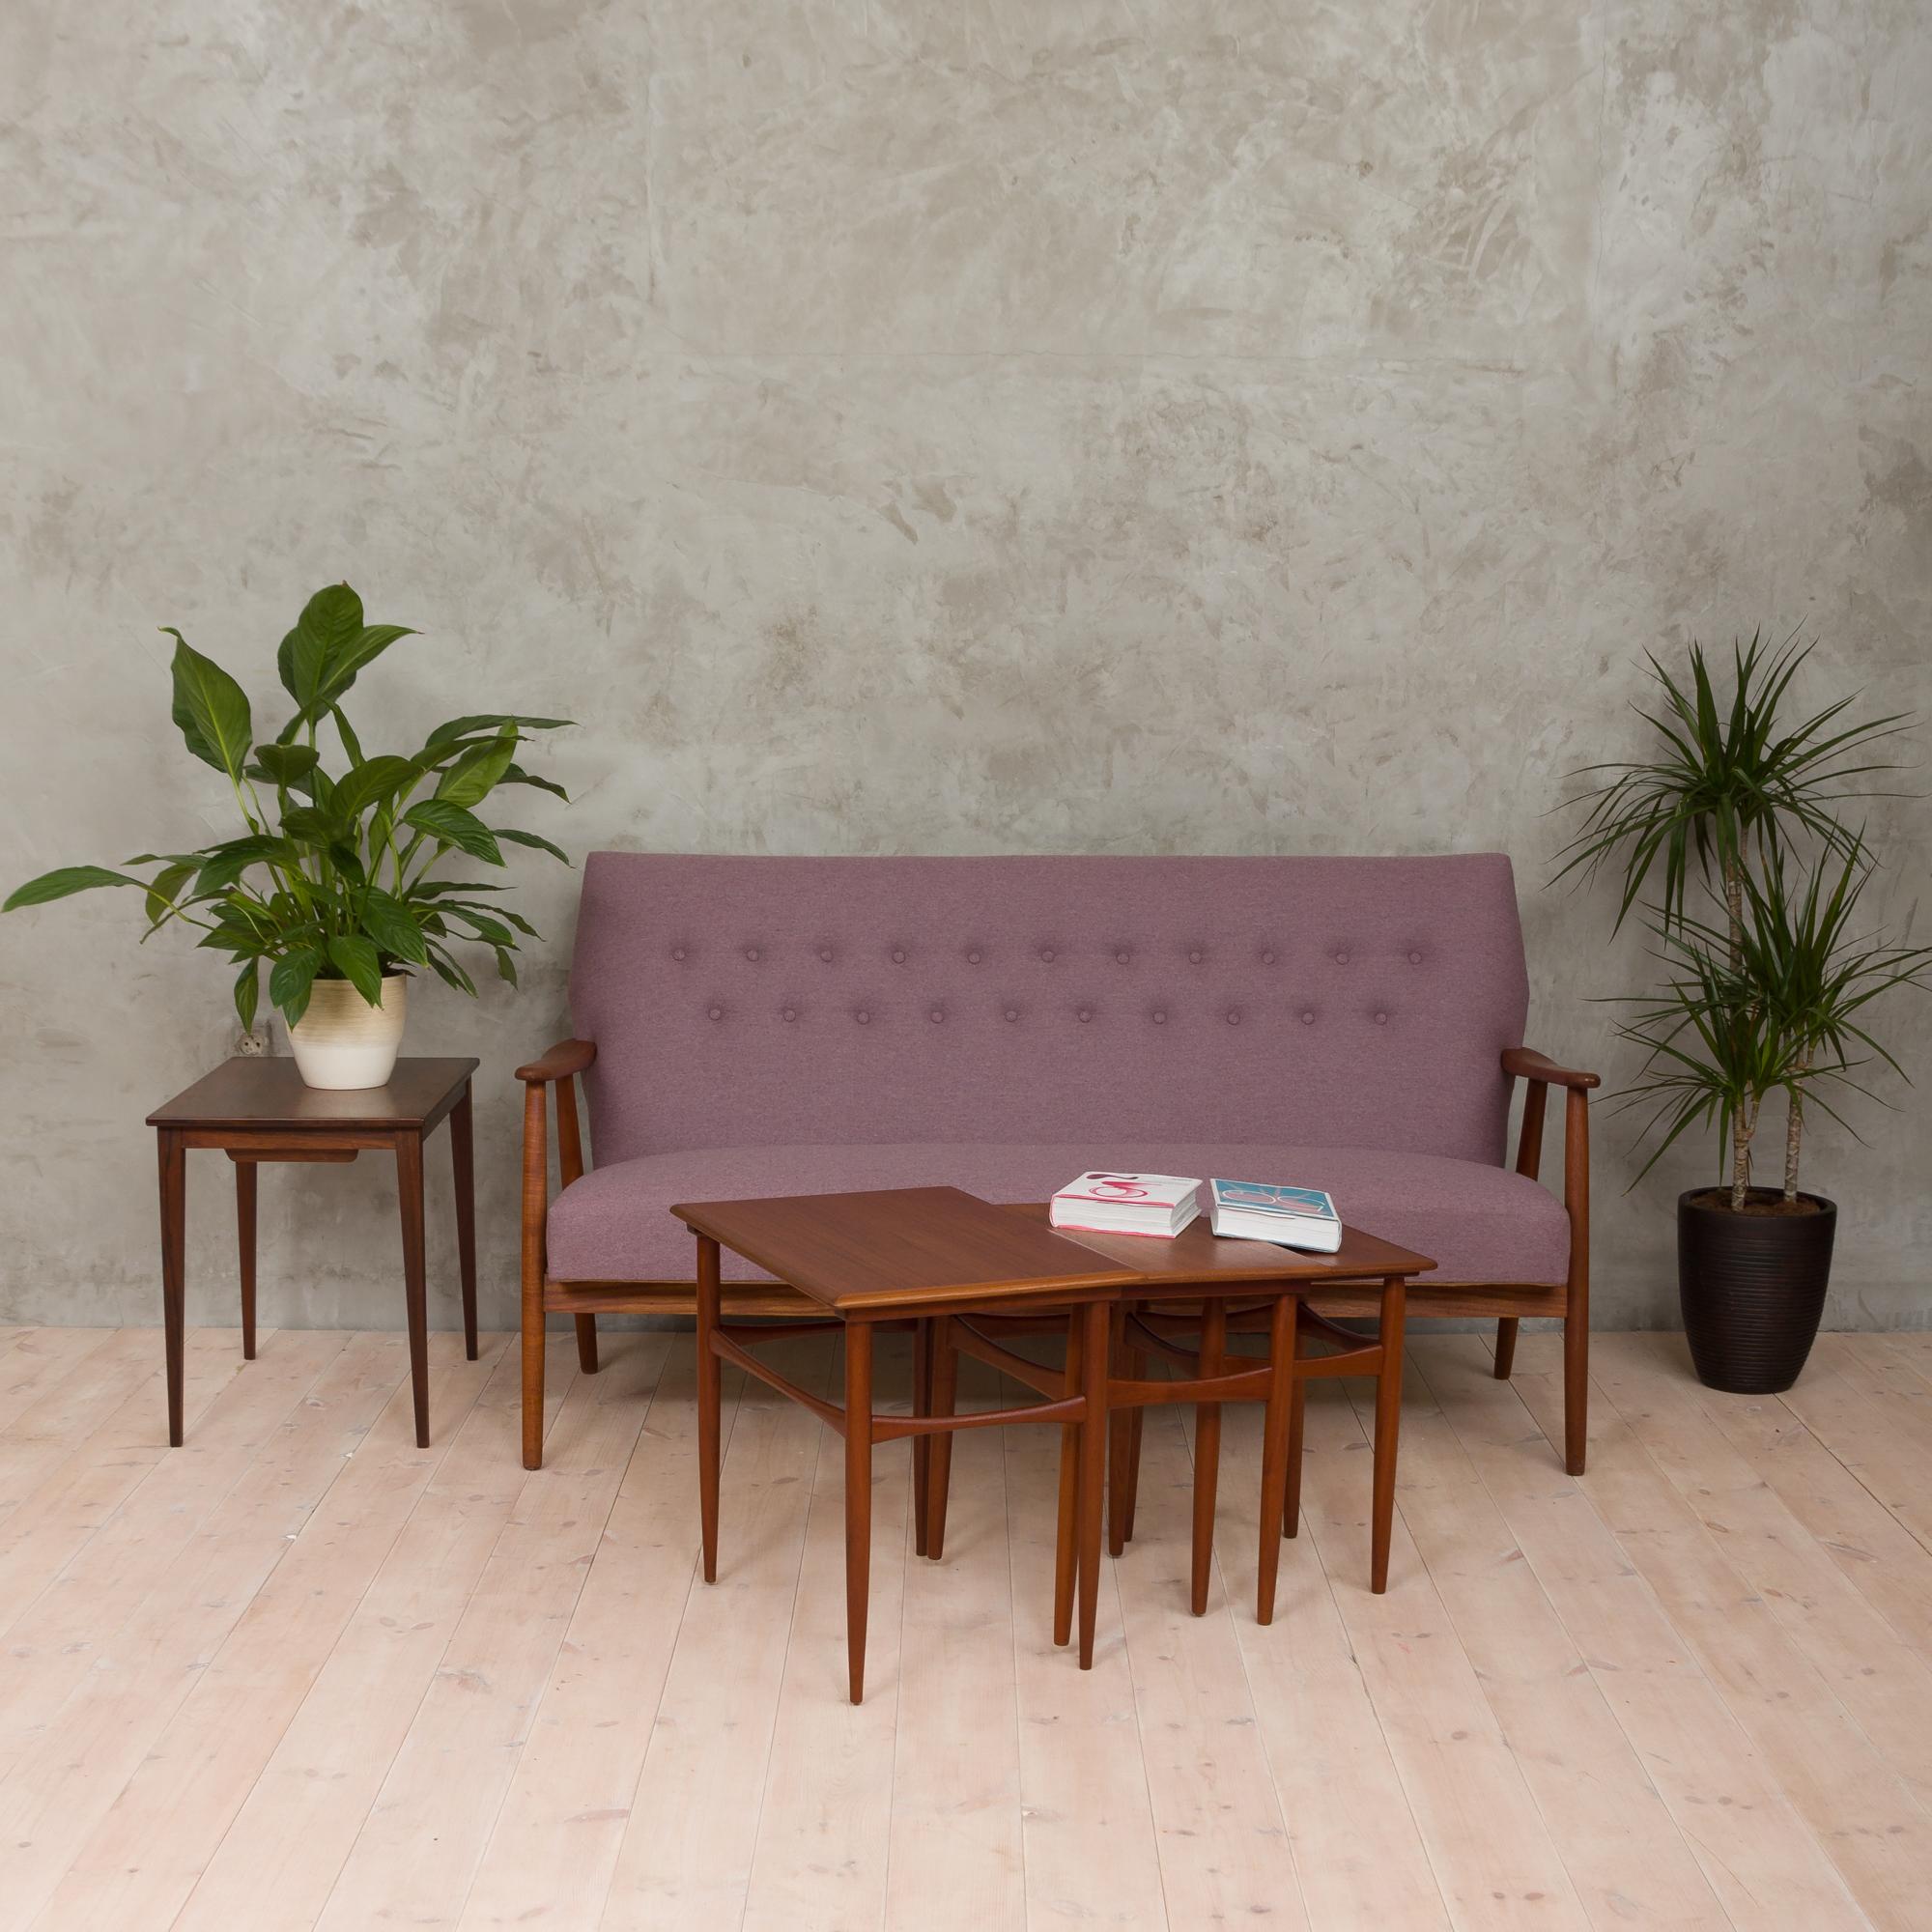 Danish midcentury sofa that features a frame in solid teak and was reupholstered in a light lilac natural wool fabric. It has a coil spring seat and was restored using traditional techniques according to the original design of the piece. The sofa is